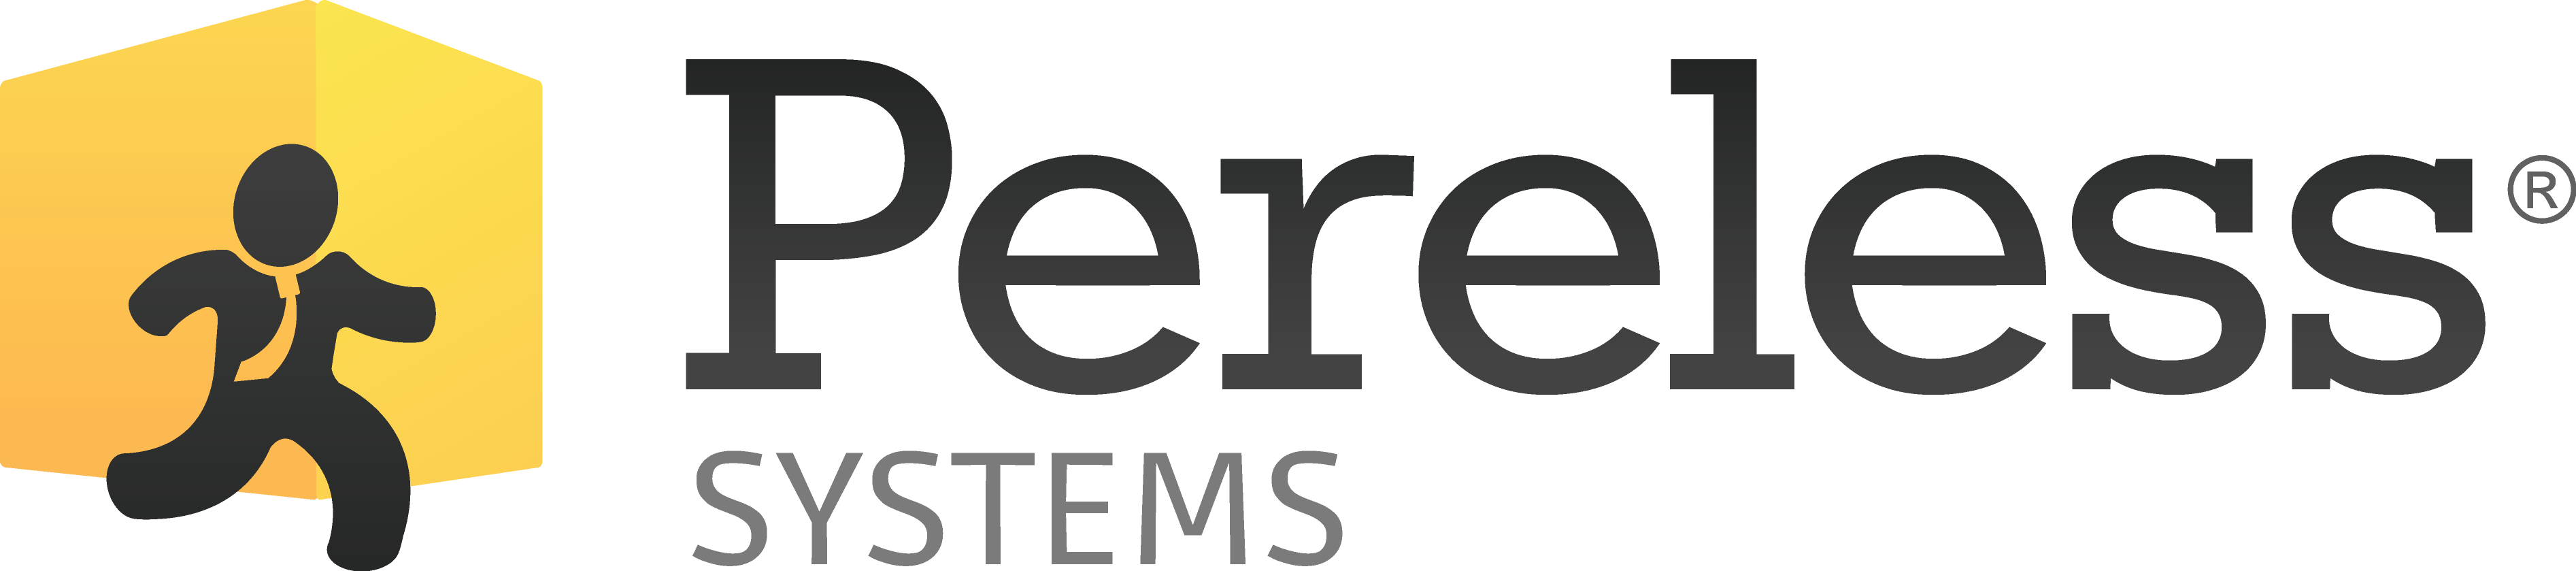 Pereless Systems